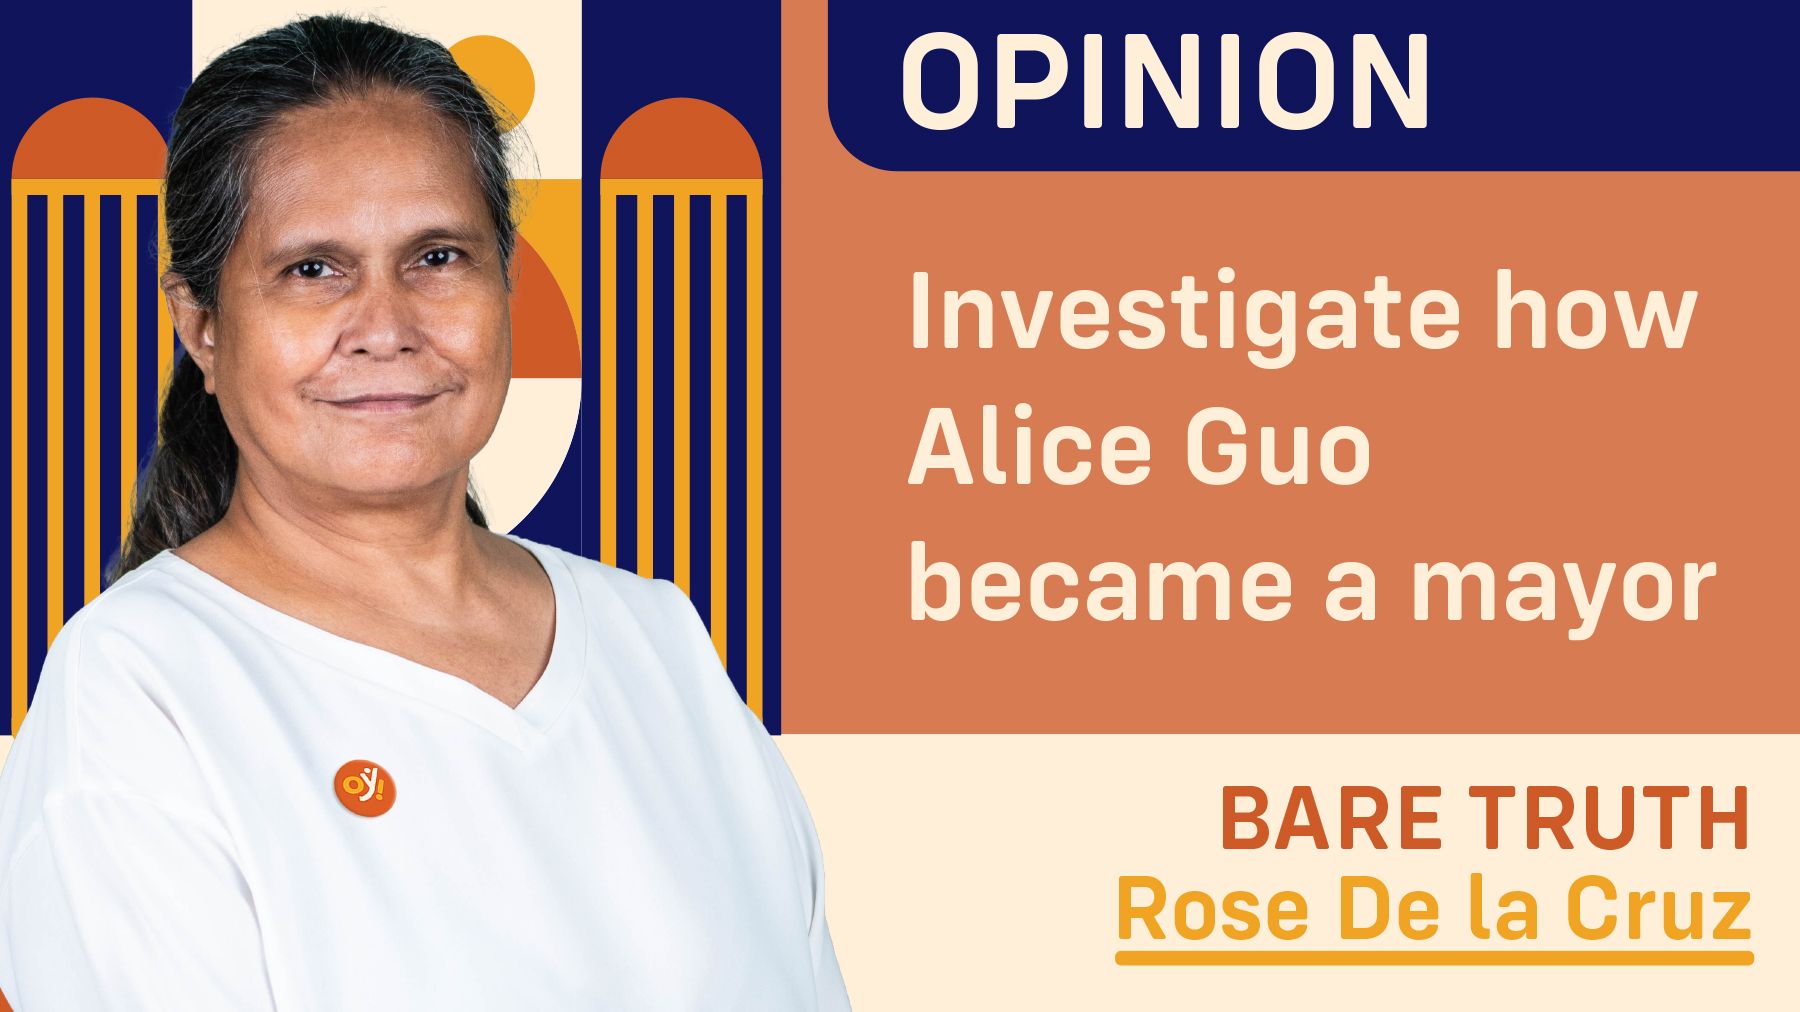 Investigate how Alice Guo became a mayor